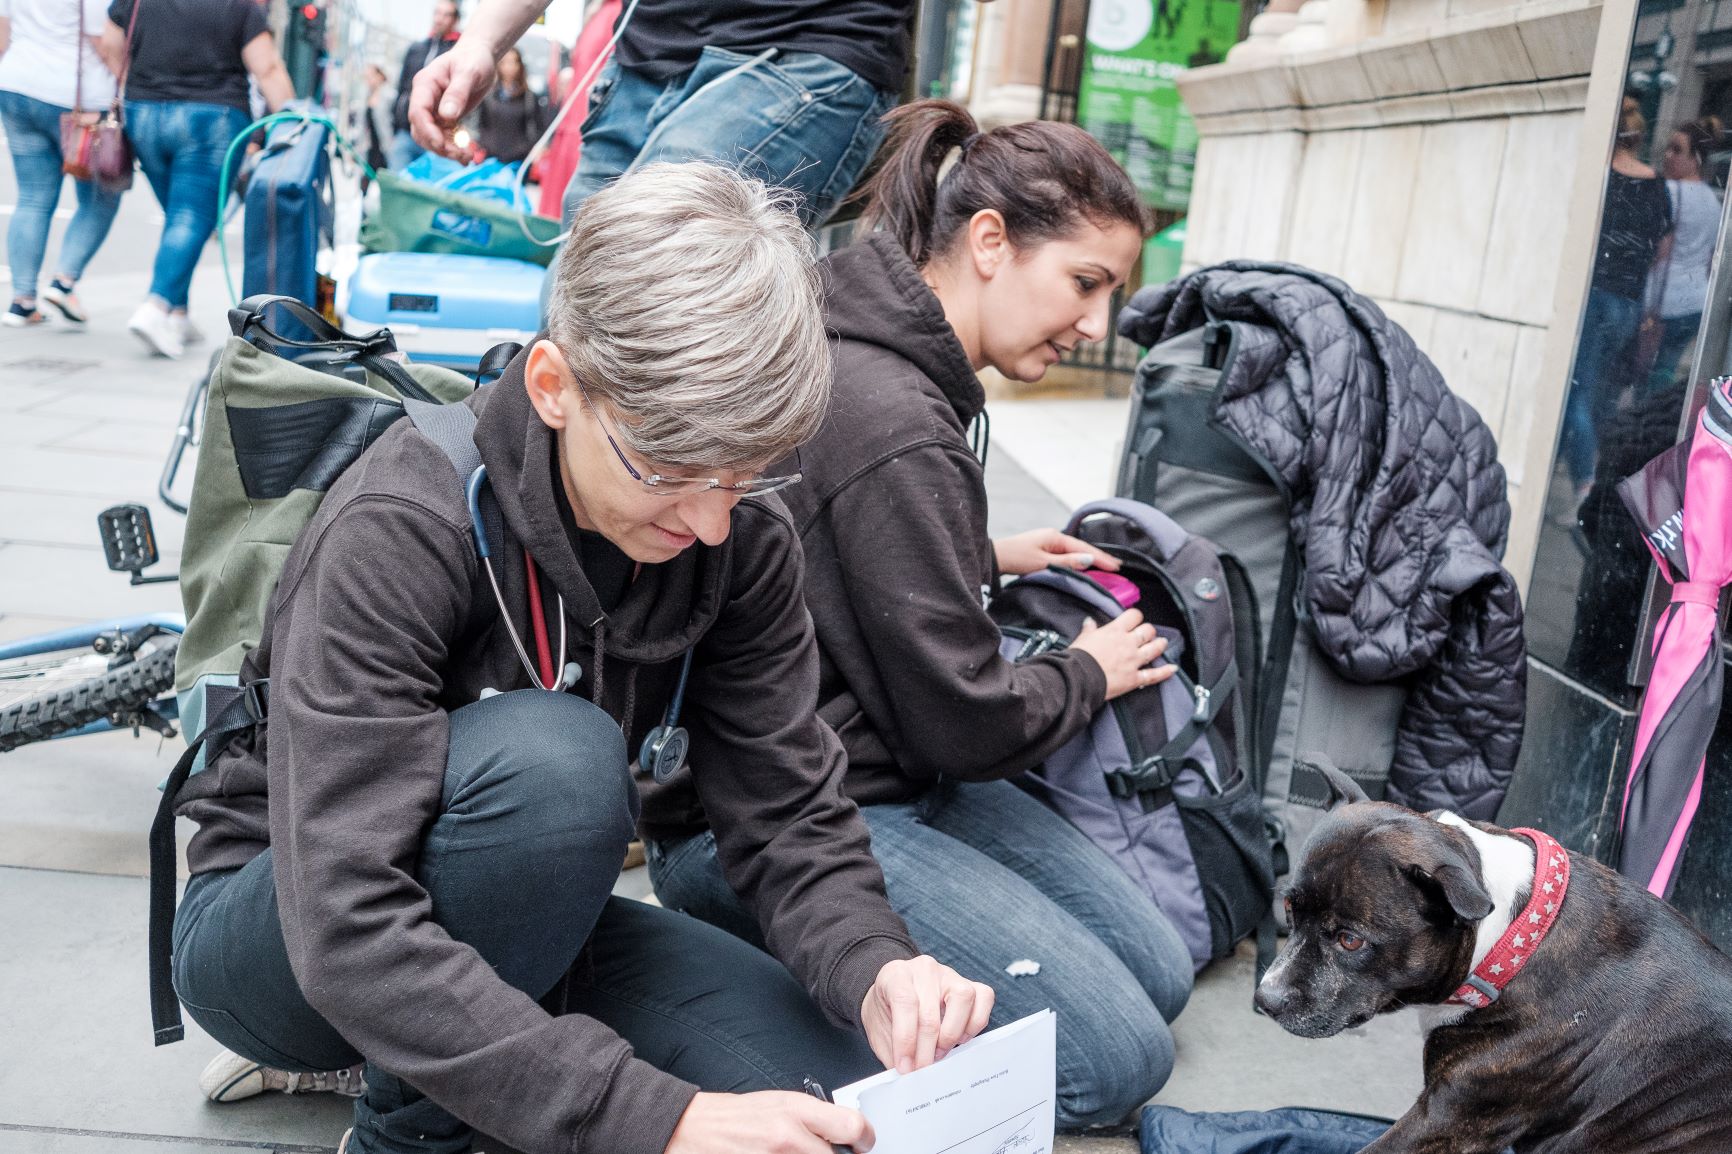 Aberdeen Cyrenians launches new service for pets of people affected by homelessness